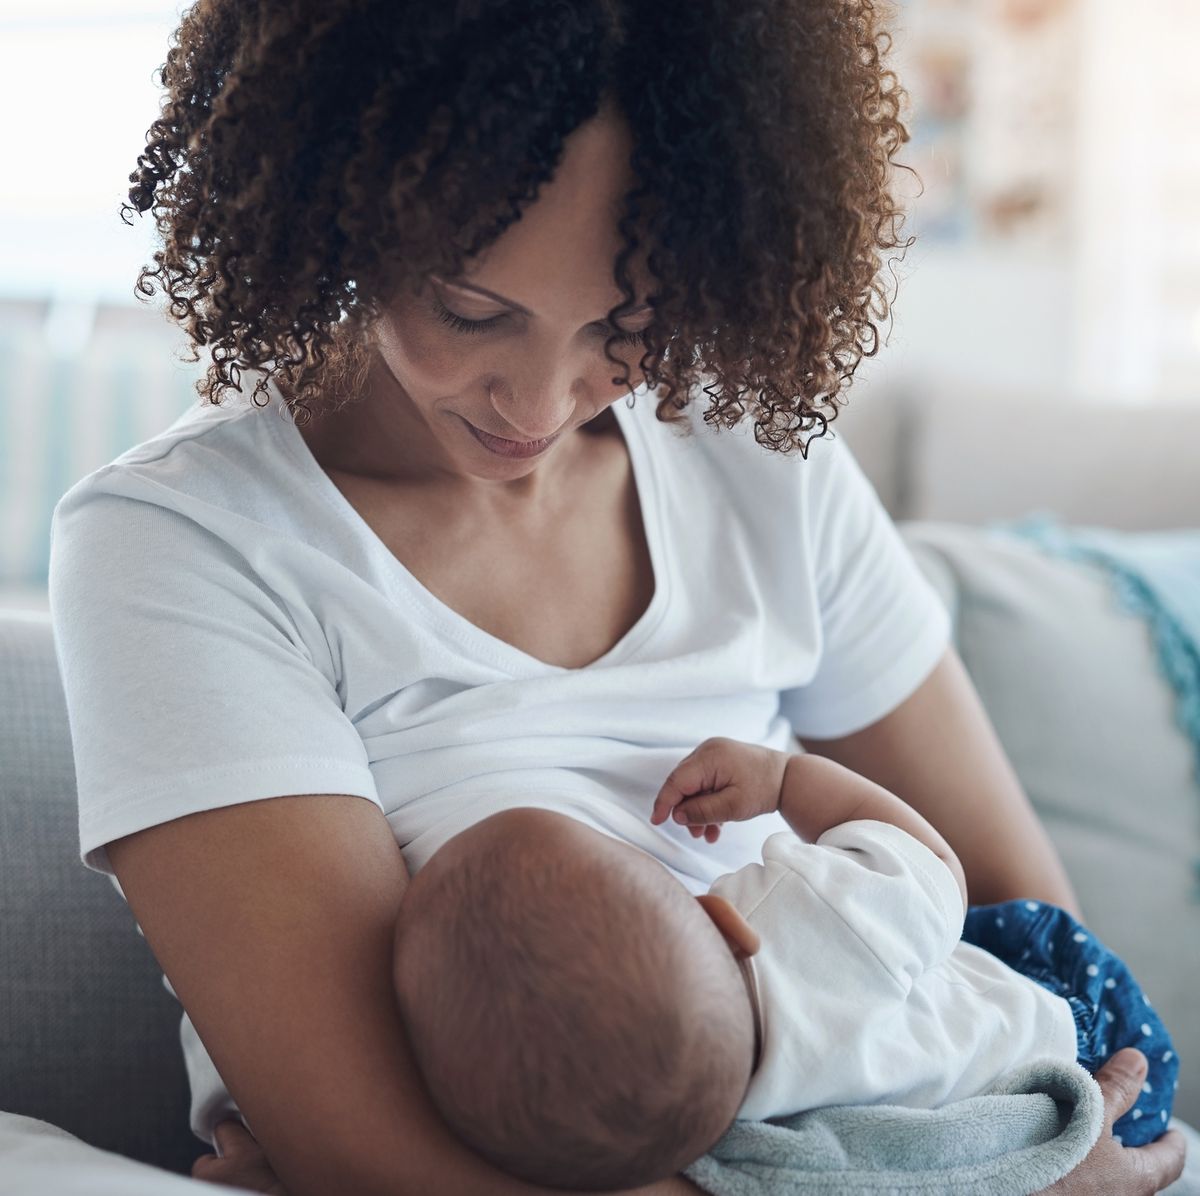 Healthy Breastfeeding Diet: What to Eat, Foods to Avoid and More